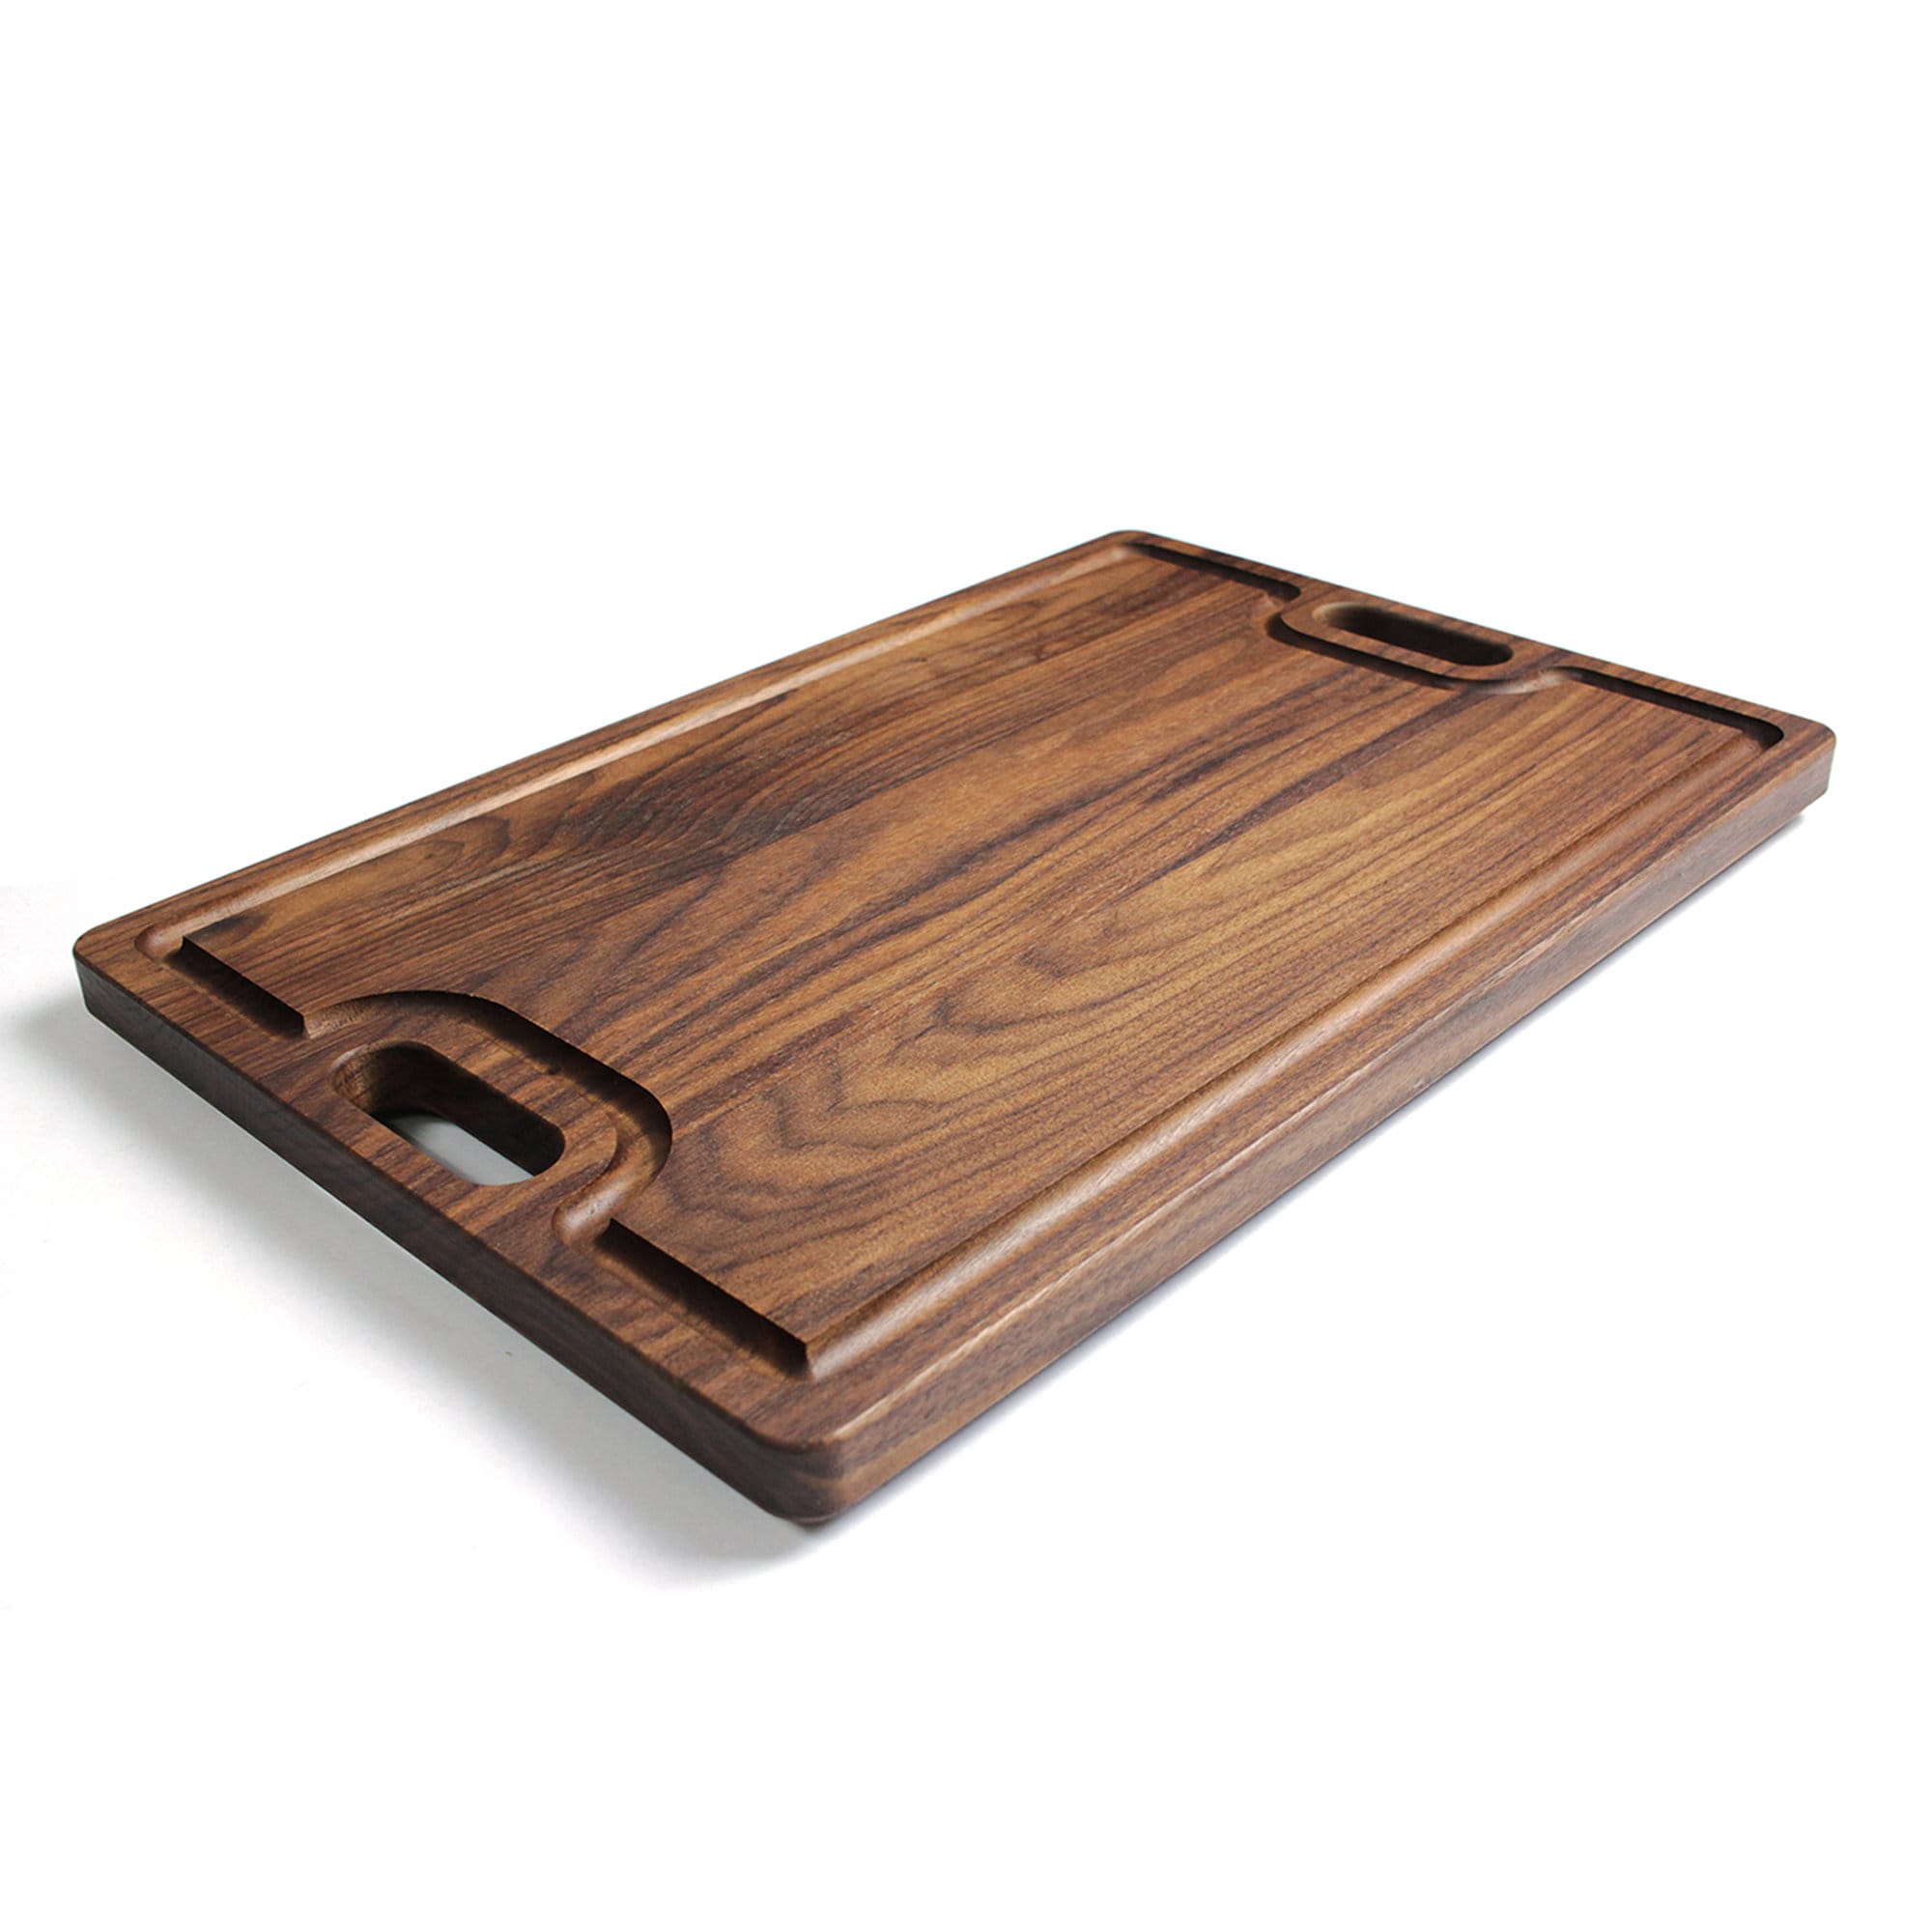 CG INTERNATIONAL TRADING Wooden Cutting Boards For Kitchen